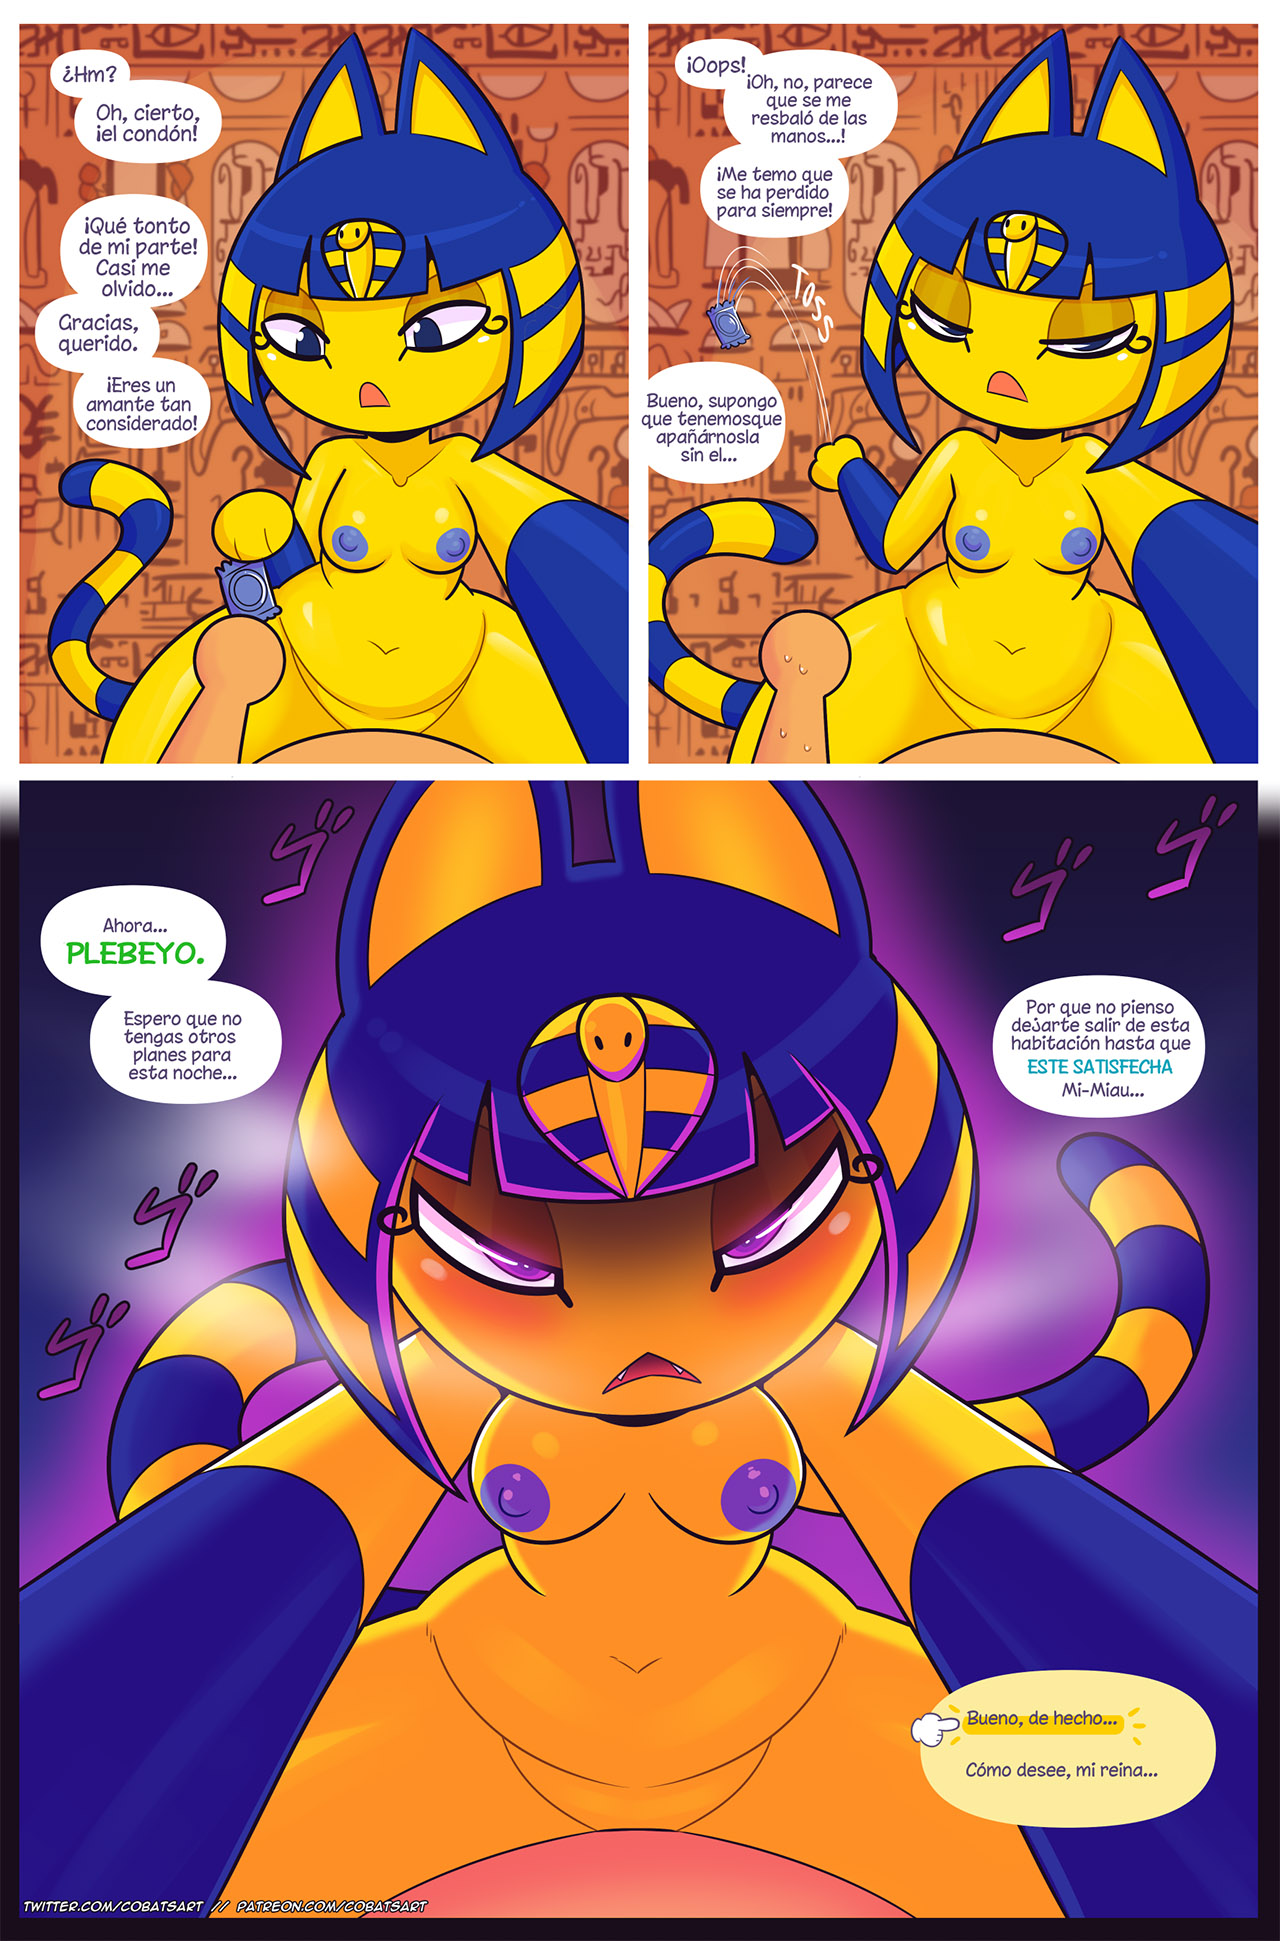 Confessing to ANKHA